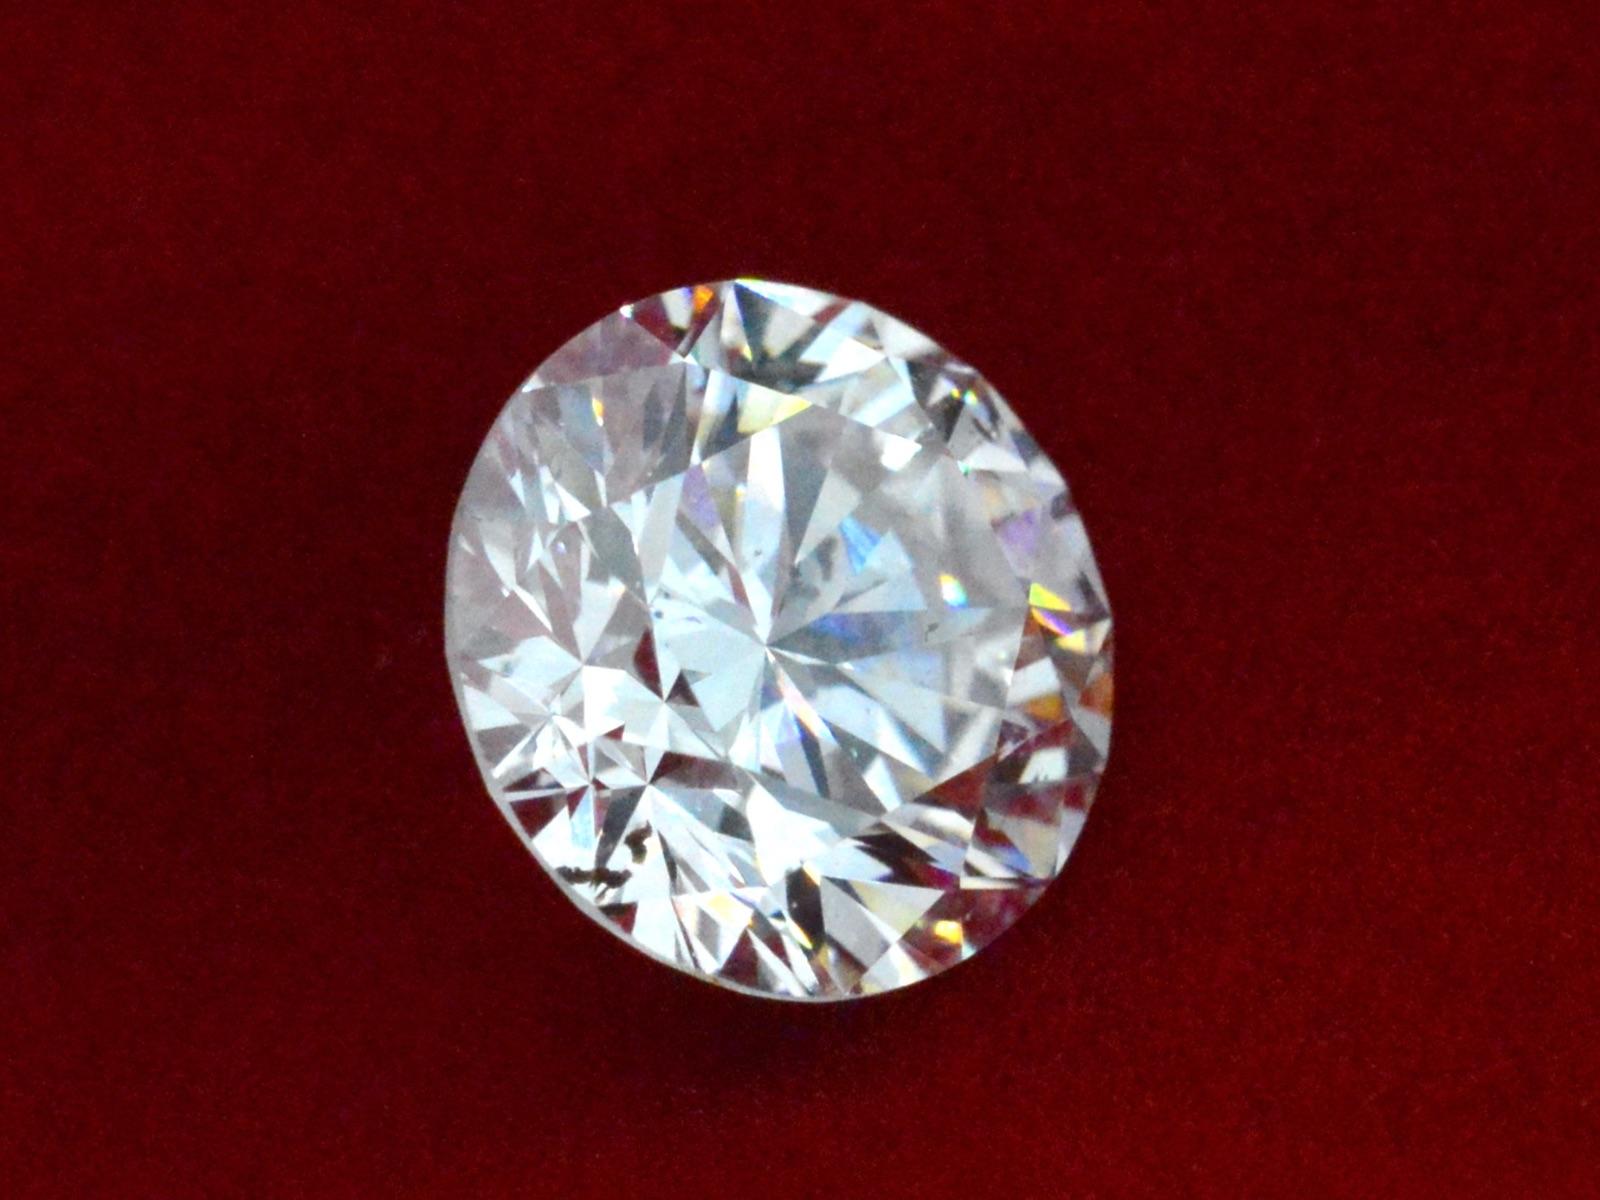 Quantity: 1
 Product Name: 0.78 Carat Natural Starcut Diamond with Laser Engraved
 Brand: Starcut
 Cut shape: Brilliant cut modified
 Weight: 0.78 carat
 Color: D
 Purity: VVS1
 Packaging: IGI sealed
 Certificate number: 533204199.
 Condition: